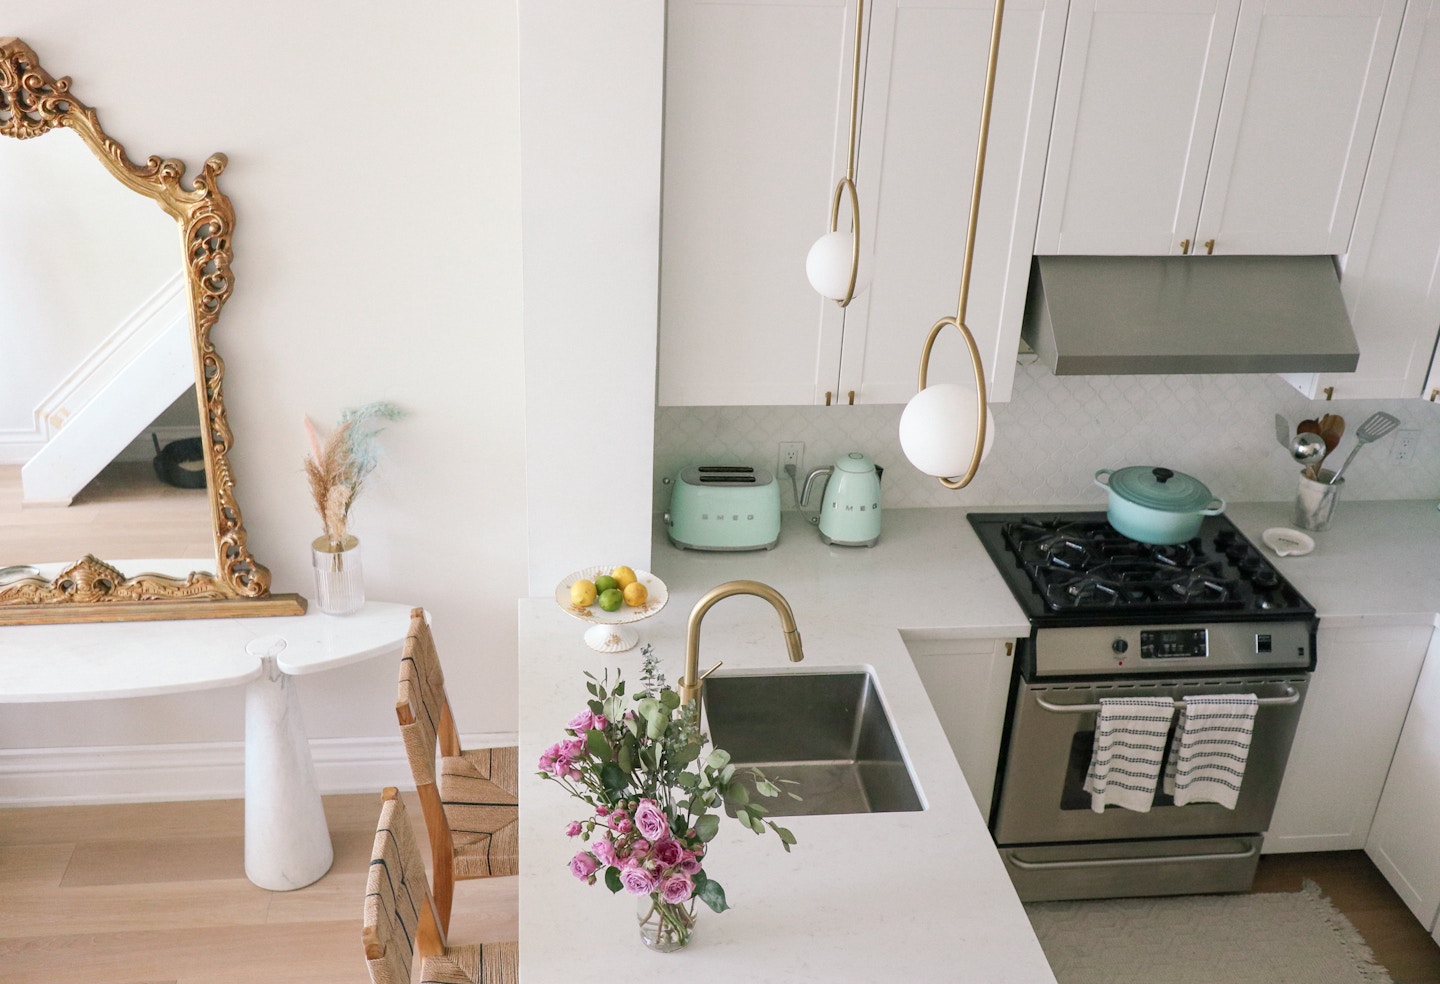 Renovating your kitchen on a budget? These frugal reno tips will help you remodel your kitchen on the cheap with beautiful brass pendants, gold faucet, marble backsplashes and pretty kitchen accessories to pull it all together.